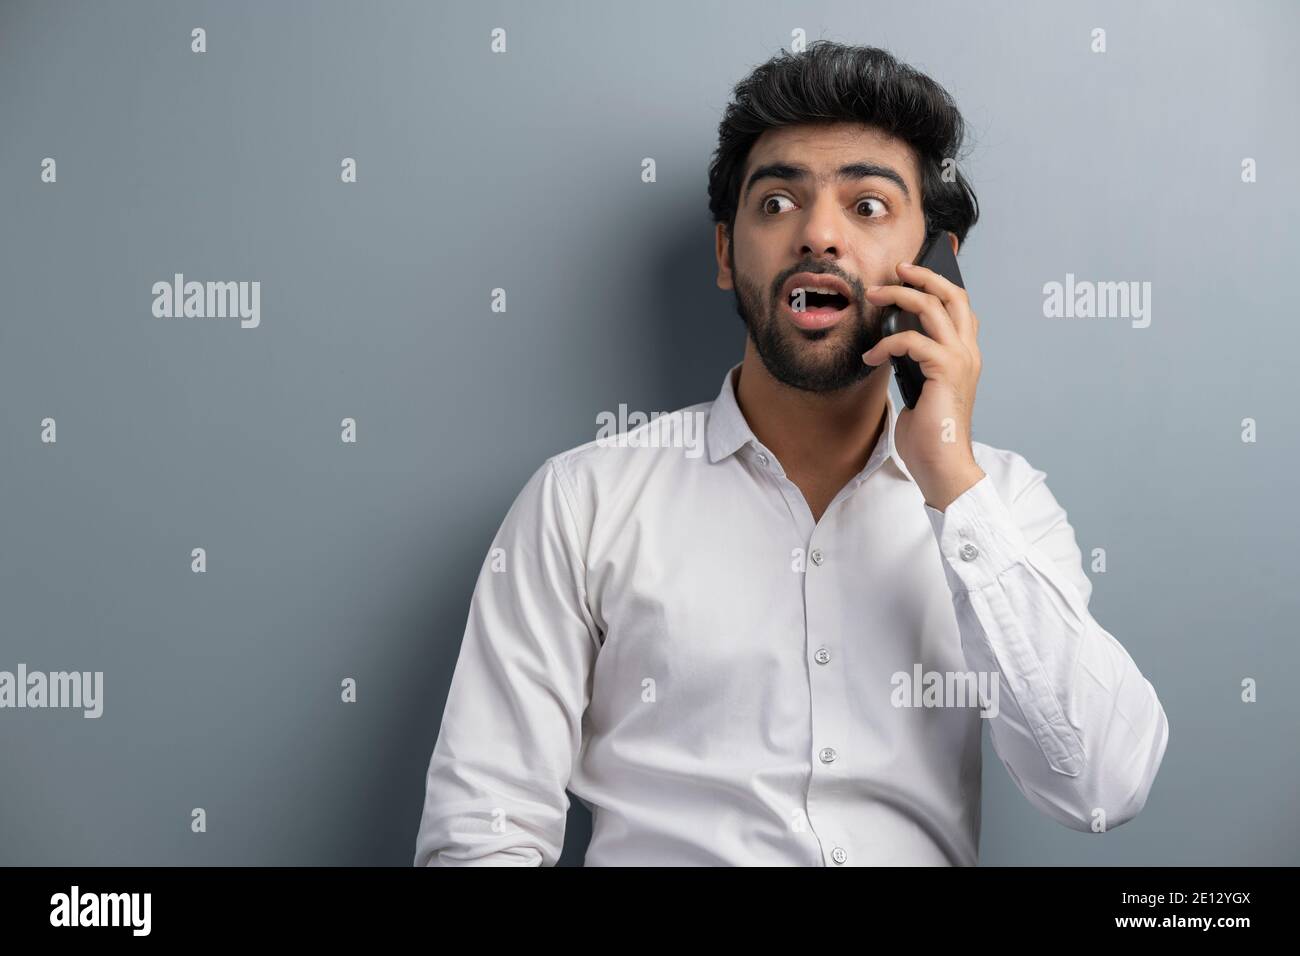 A YOUNG EXECUTIVE LOOKING SURPRISED ON A PHONE CALL Stock Photo